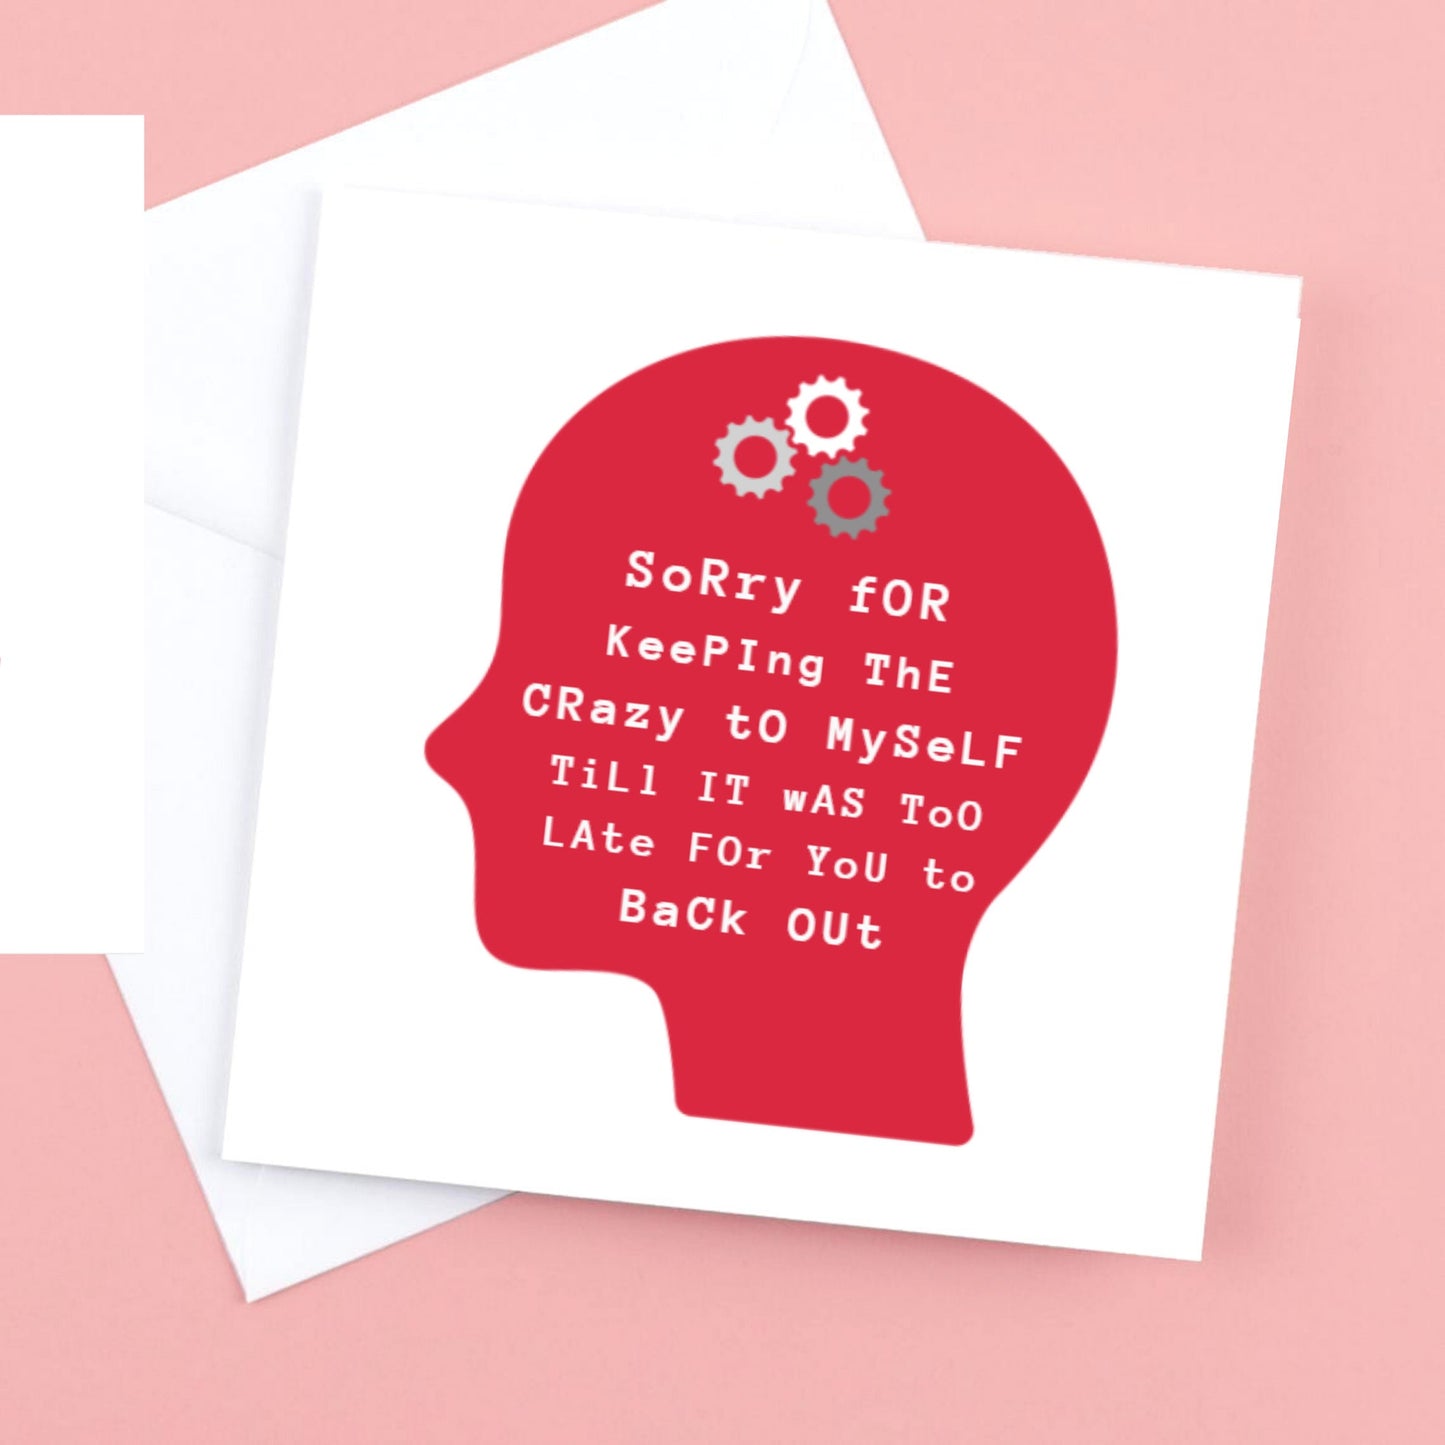 quirky card " Sorry for keeping the crazy to myself till it was too late for you to back out